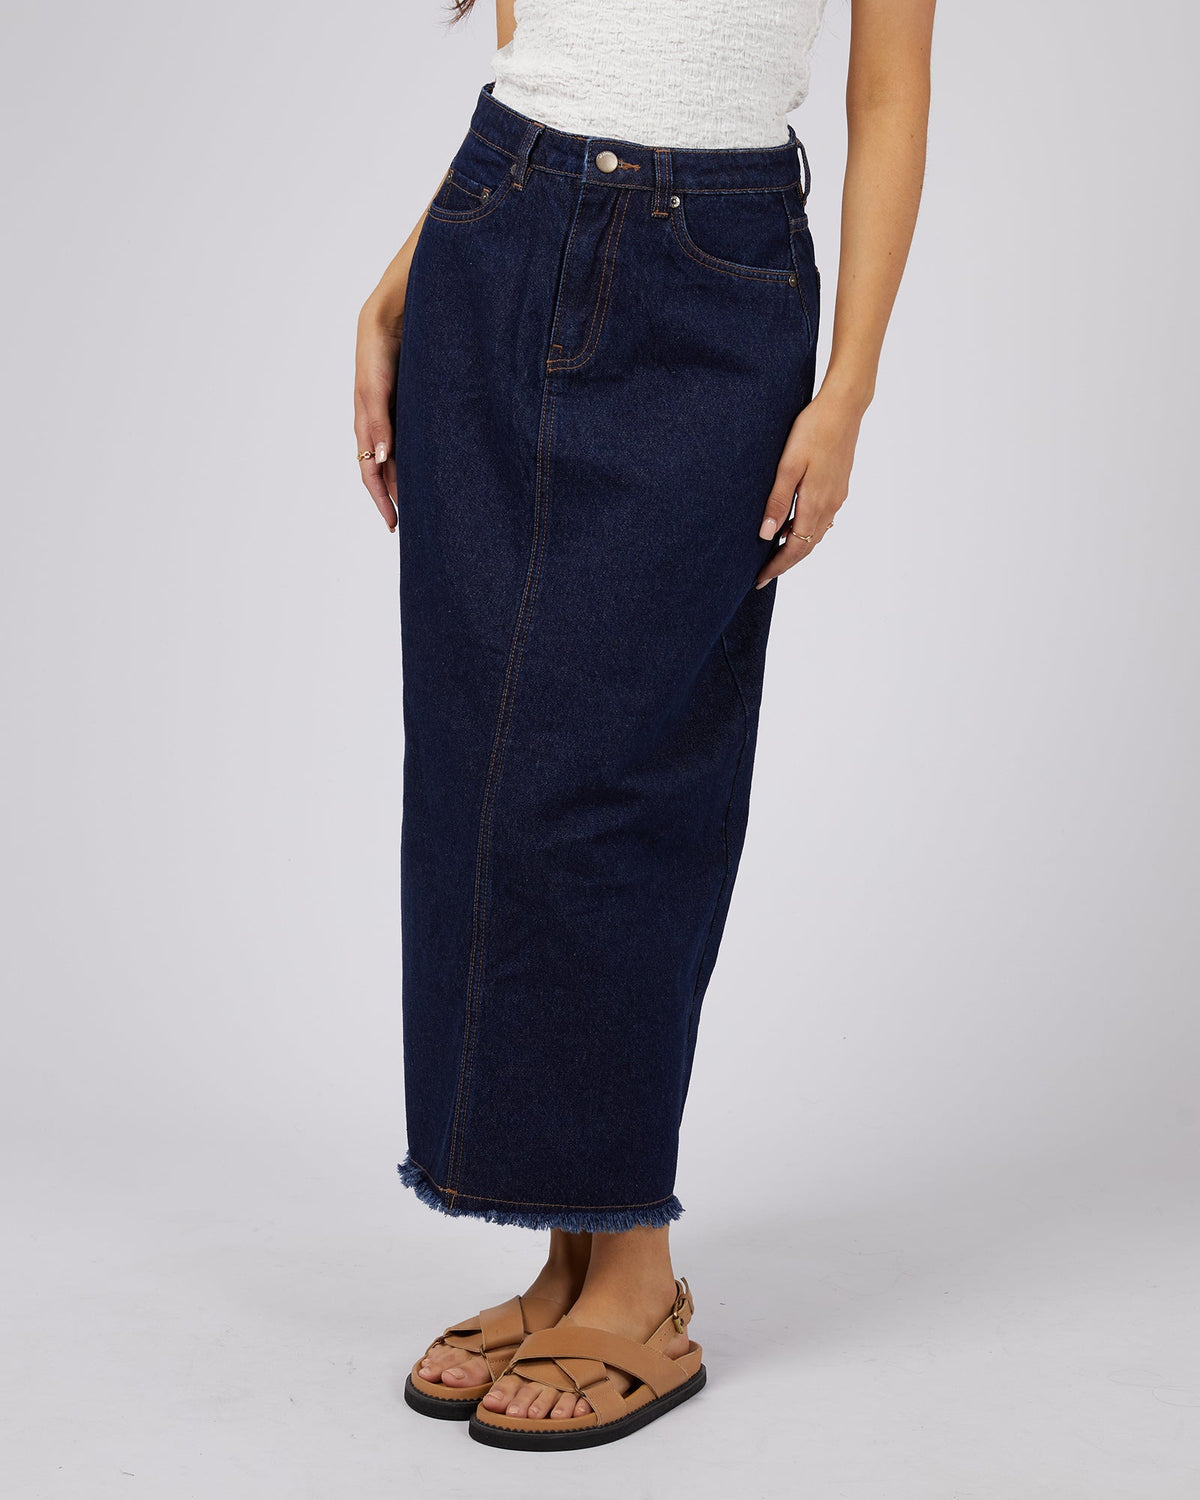 All About Eve-Ray Denim Maxi Skirt Organic Blue-Edge Clothing